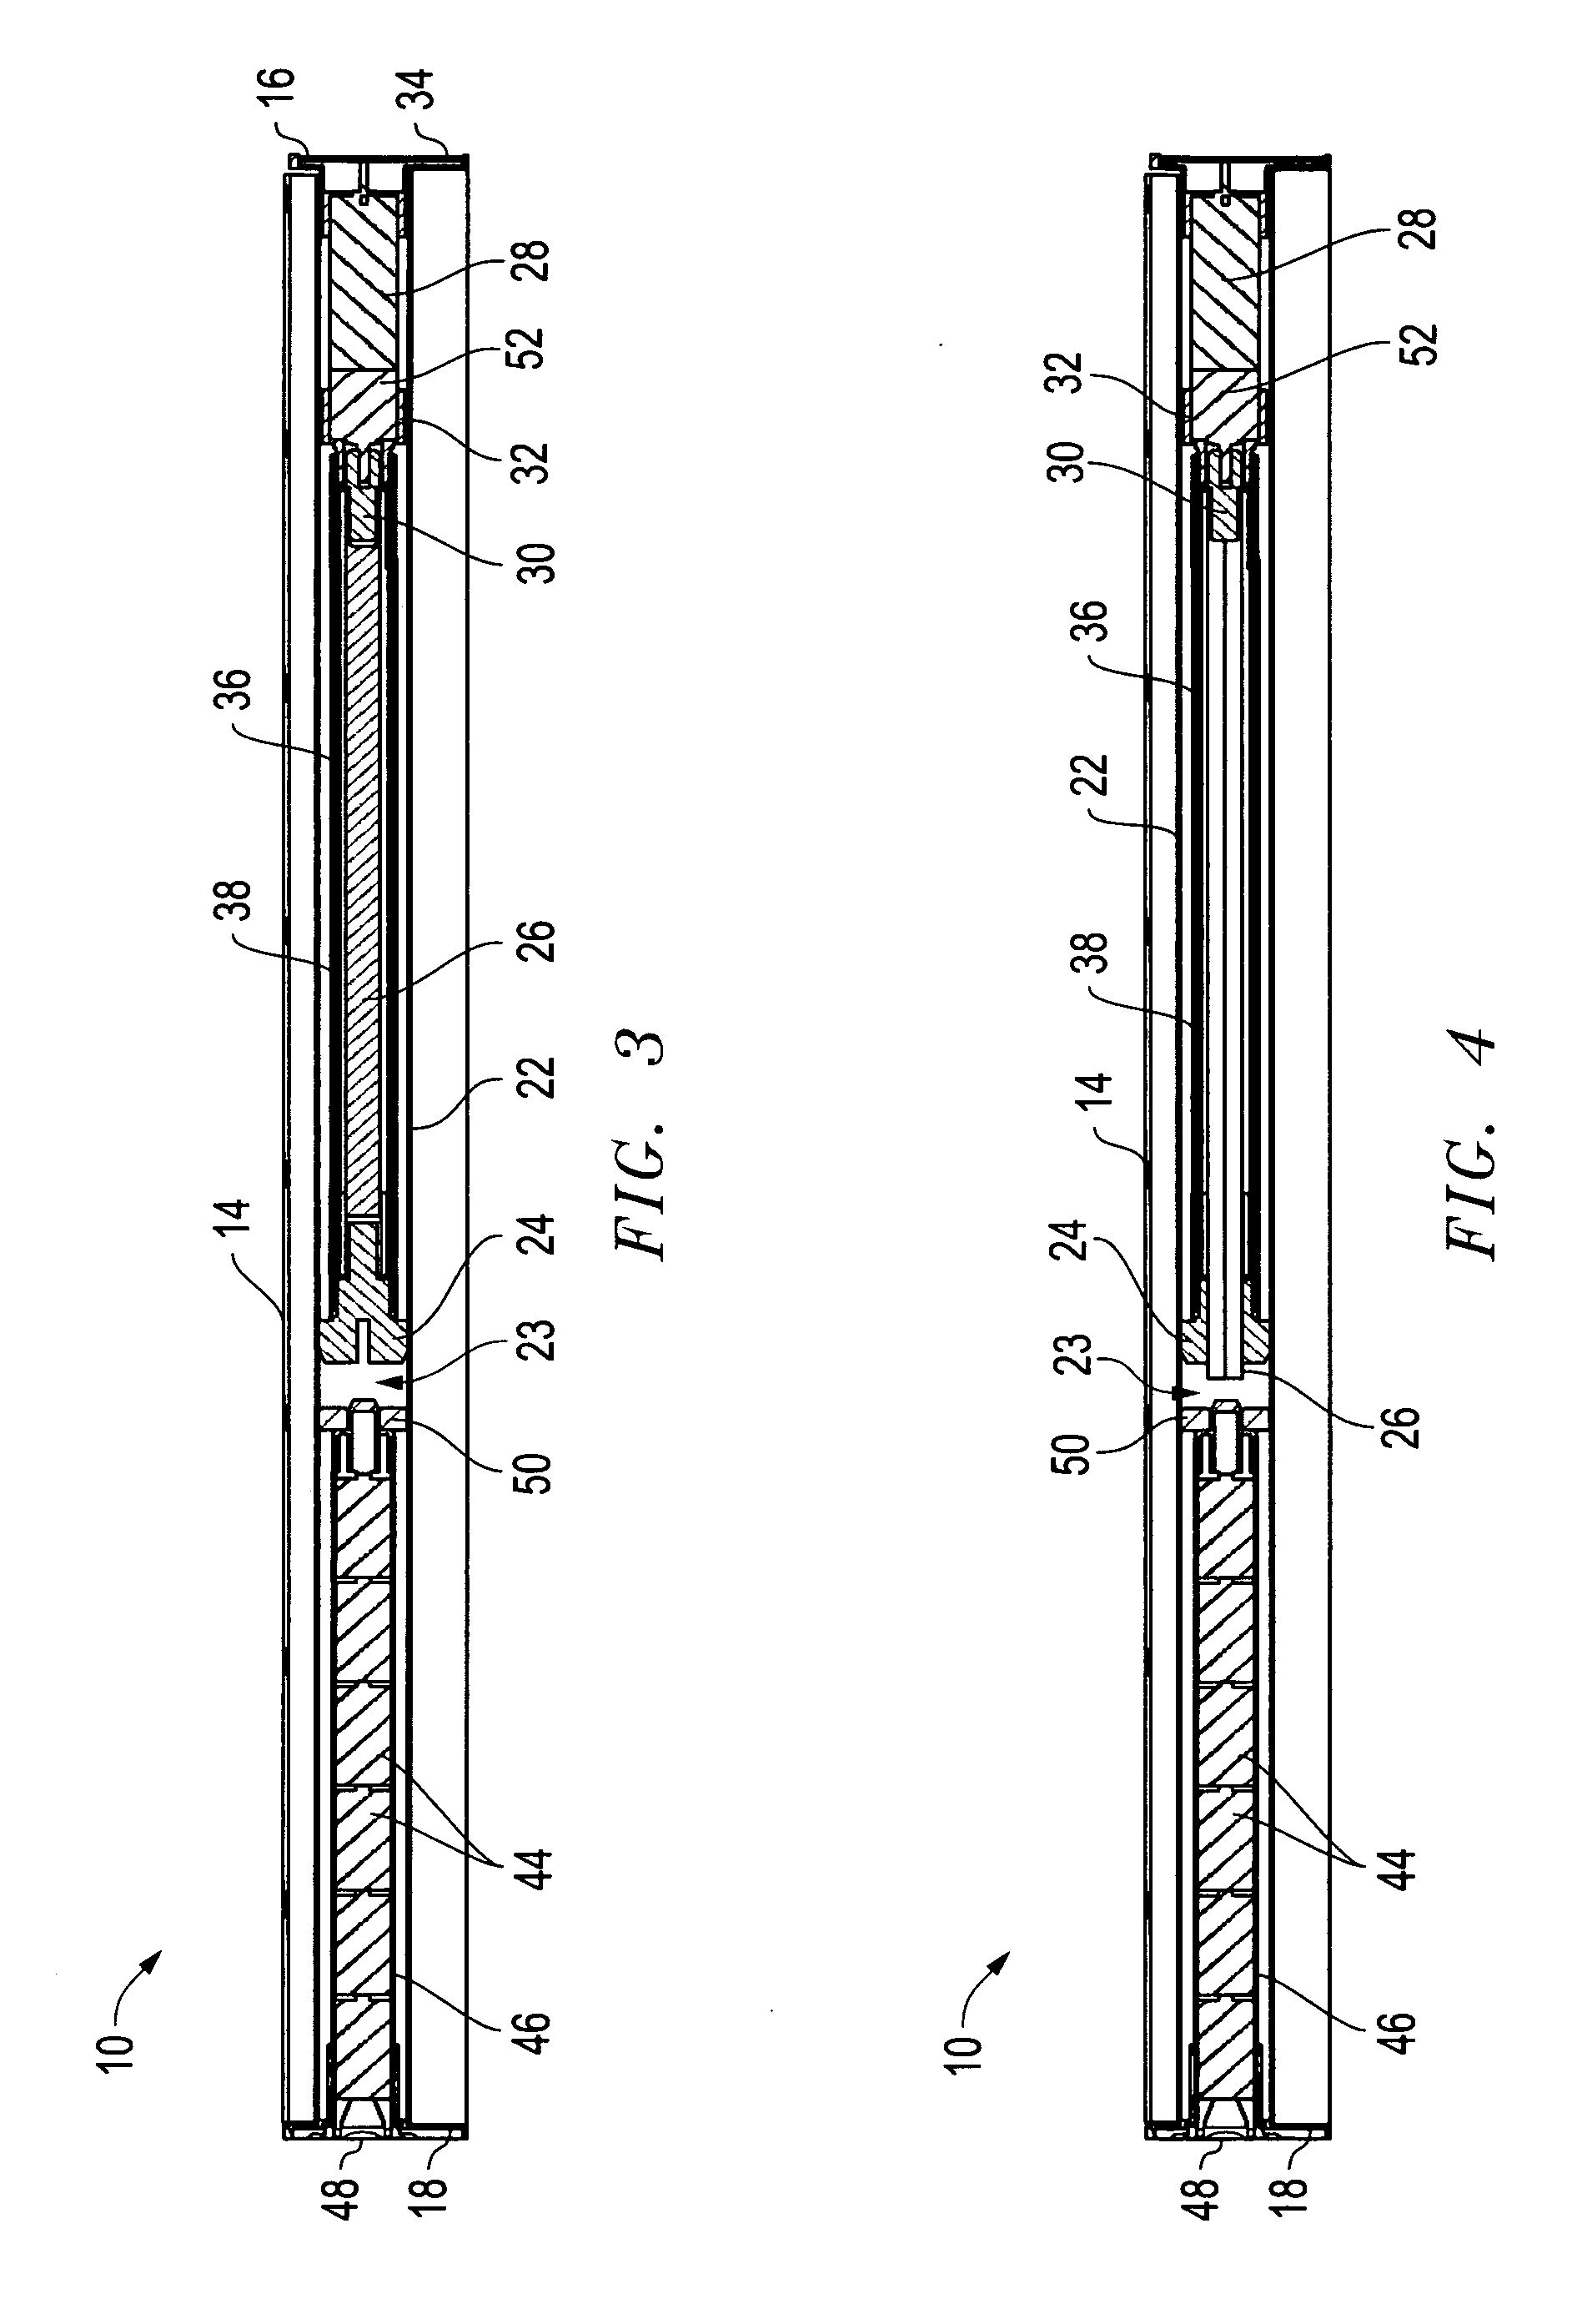 Counterbalanced motorized shade roll system and method